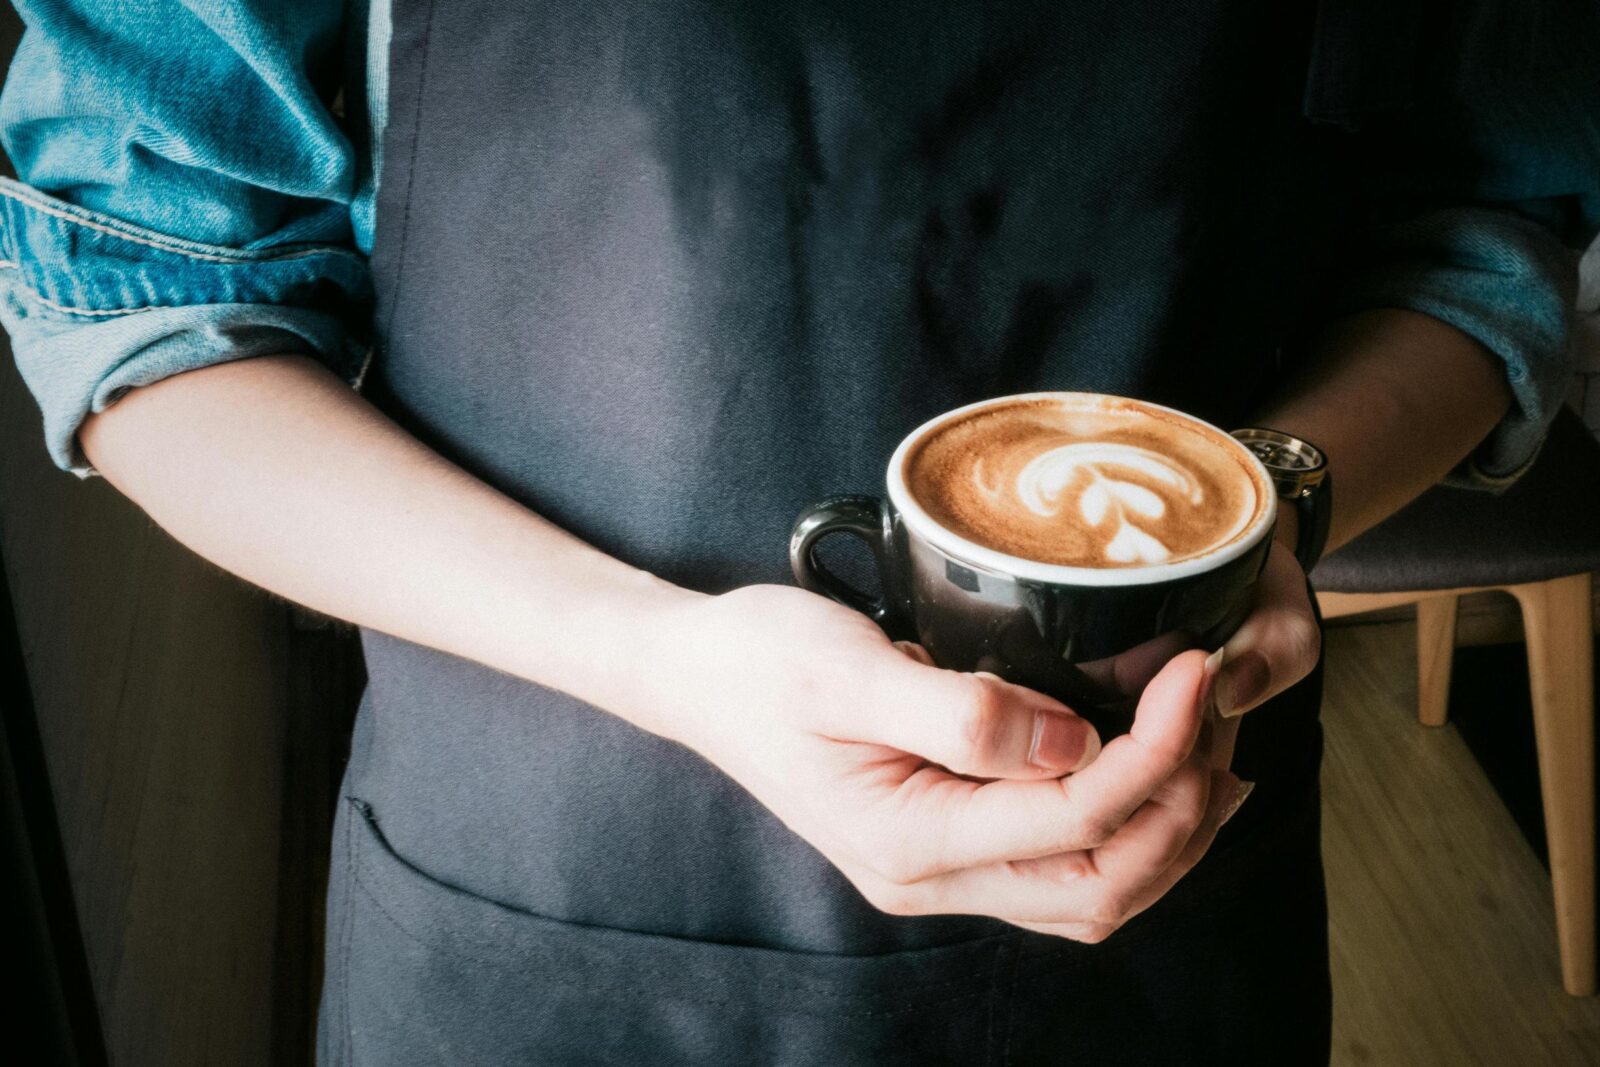 A picture of a coffee with a hand holding it. No face